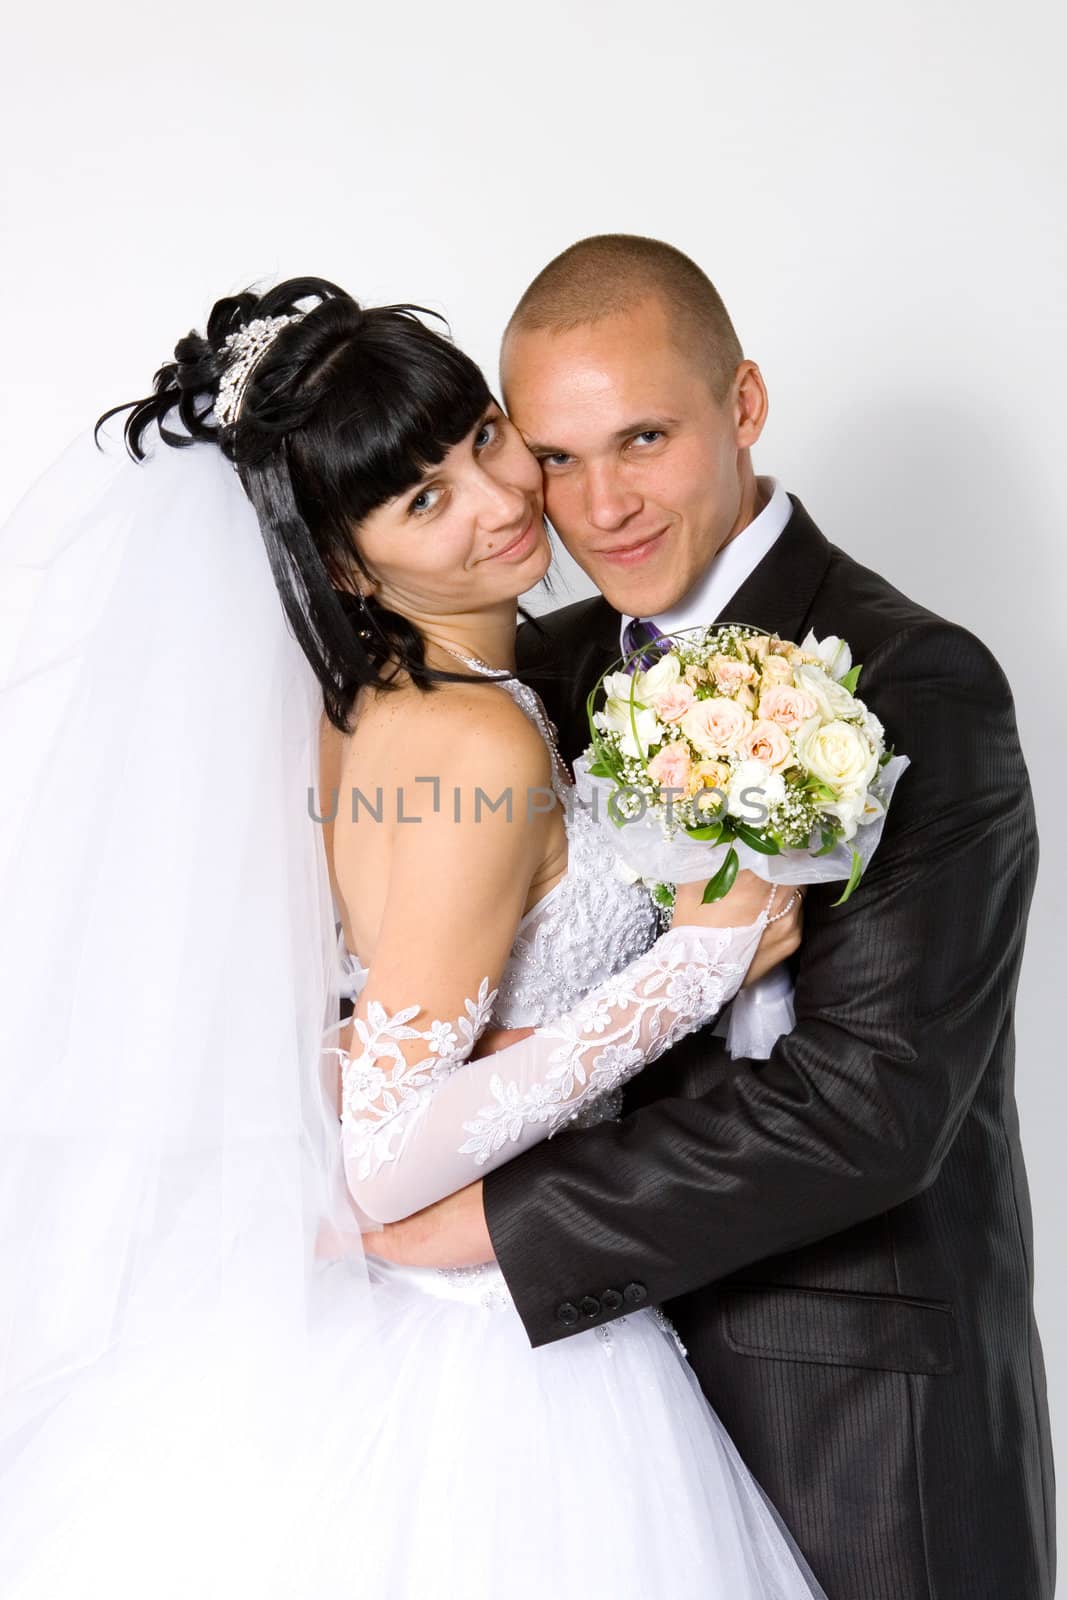 bride to the bridegroom on a white background
